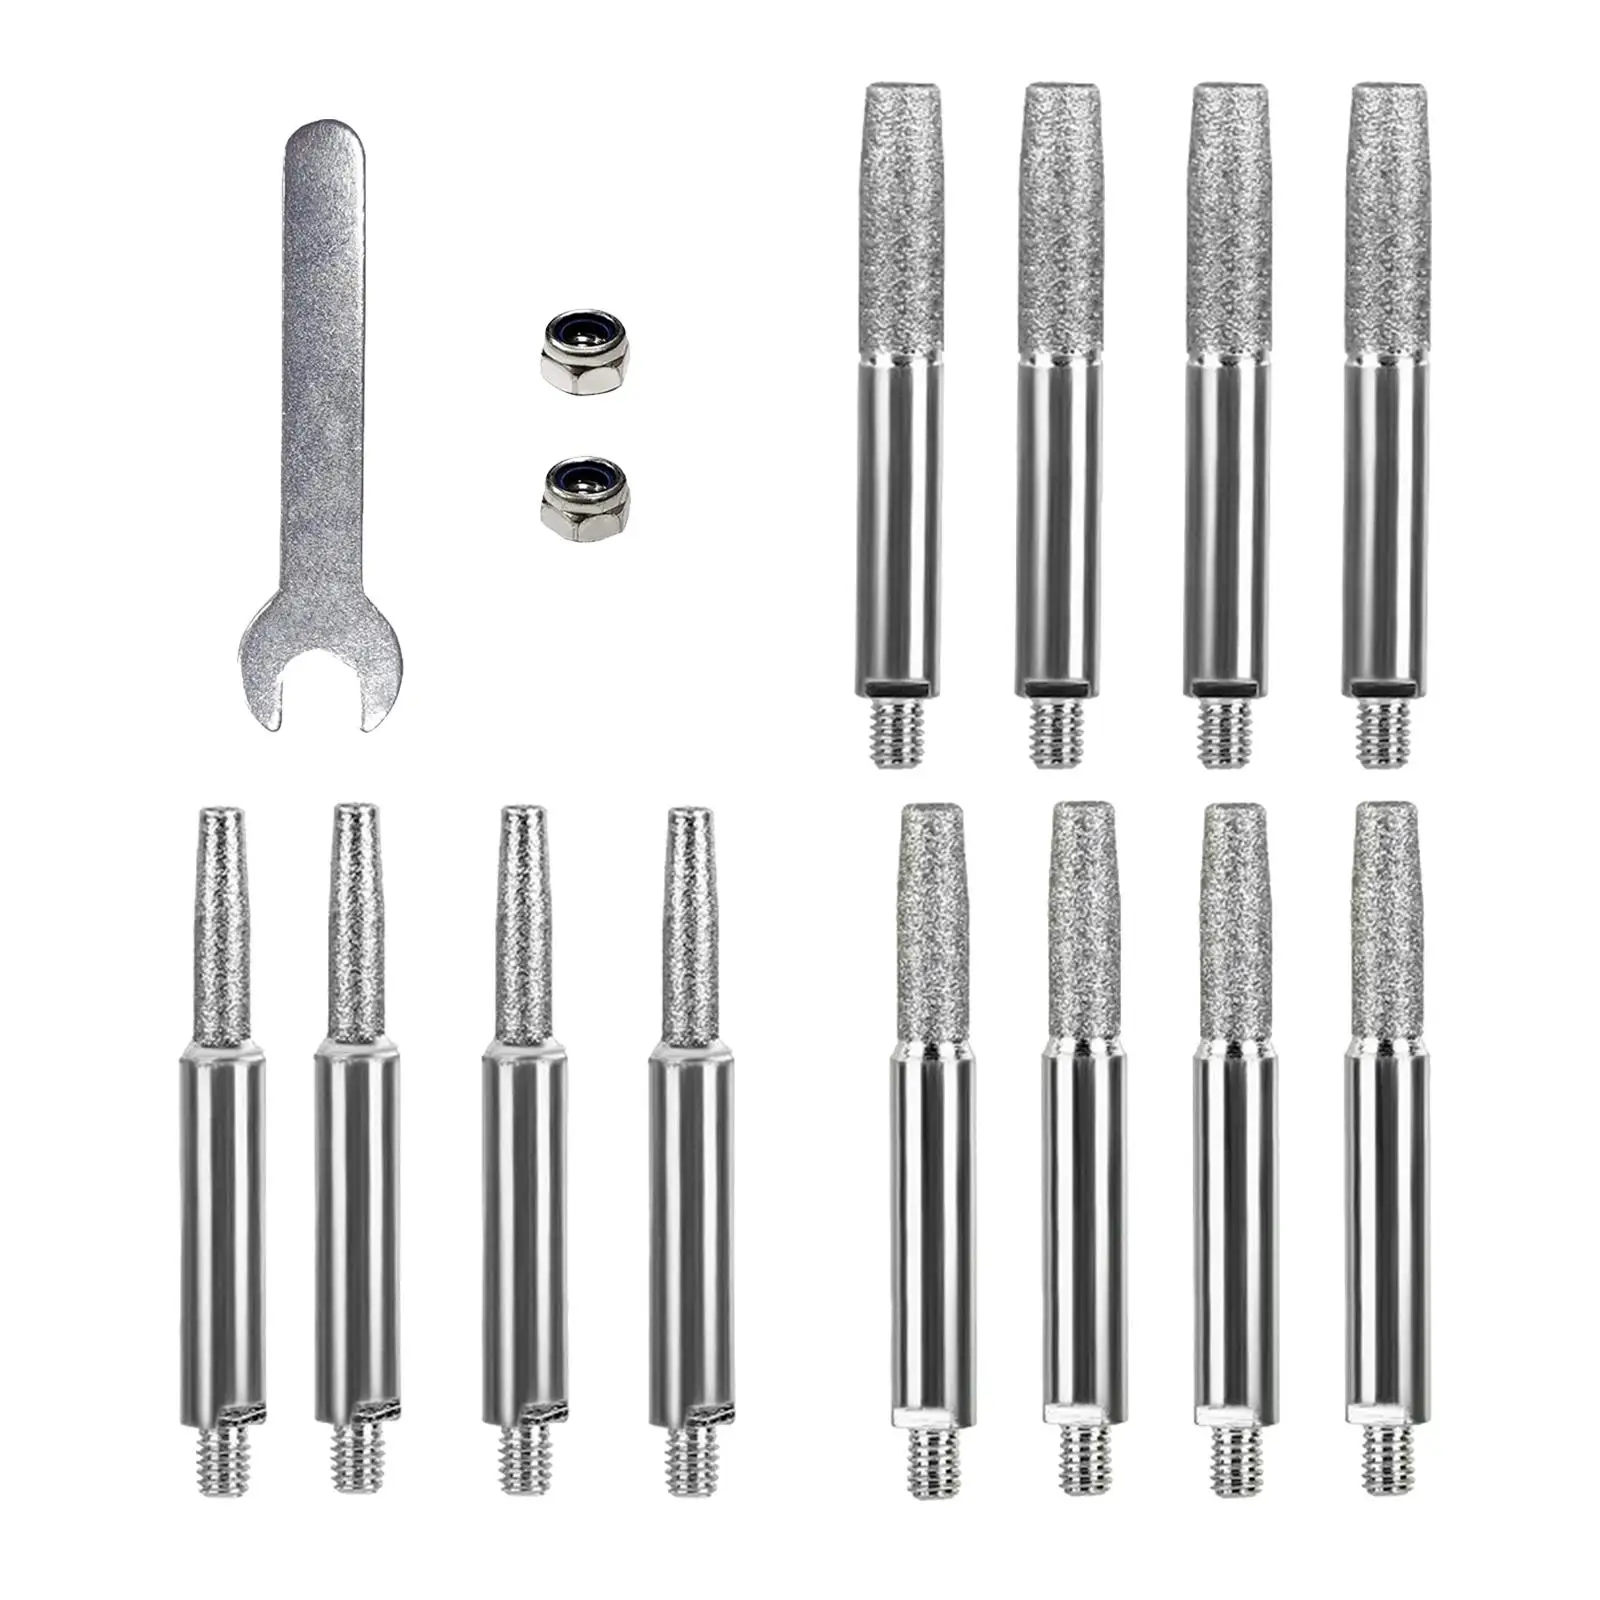 Burr Bit Set Replacement M5 Thread High Hardness Metal Grinding Tool Milling Polishing Cutter for Woodworking DIY